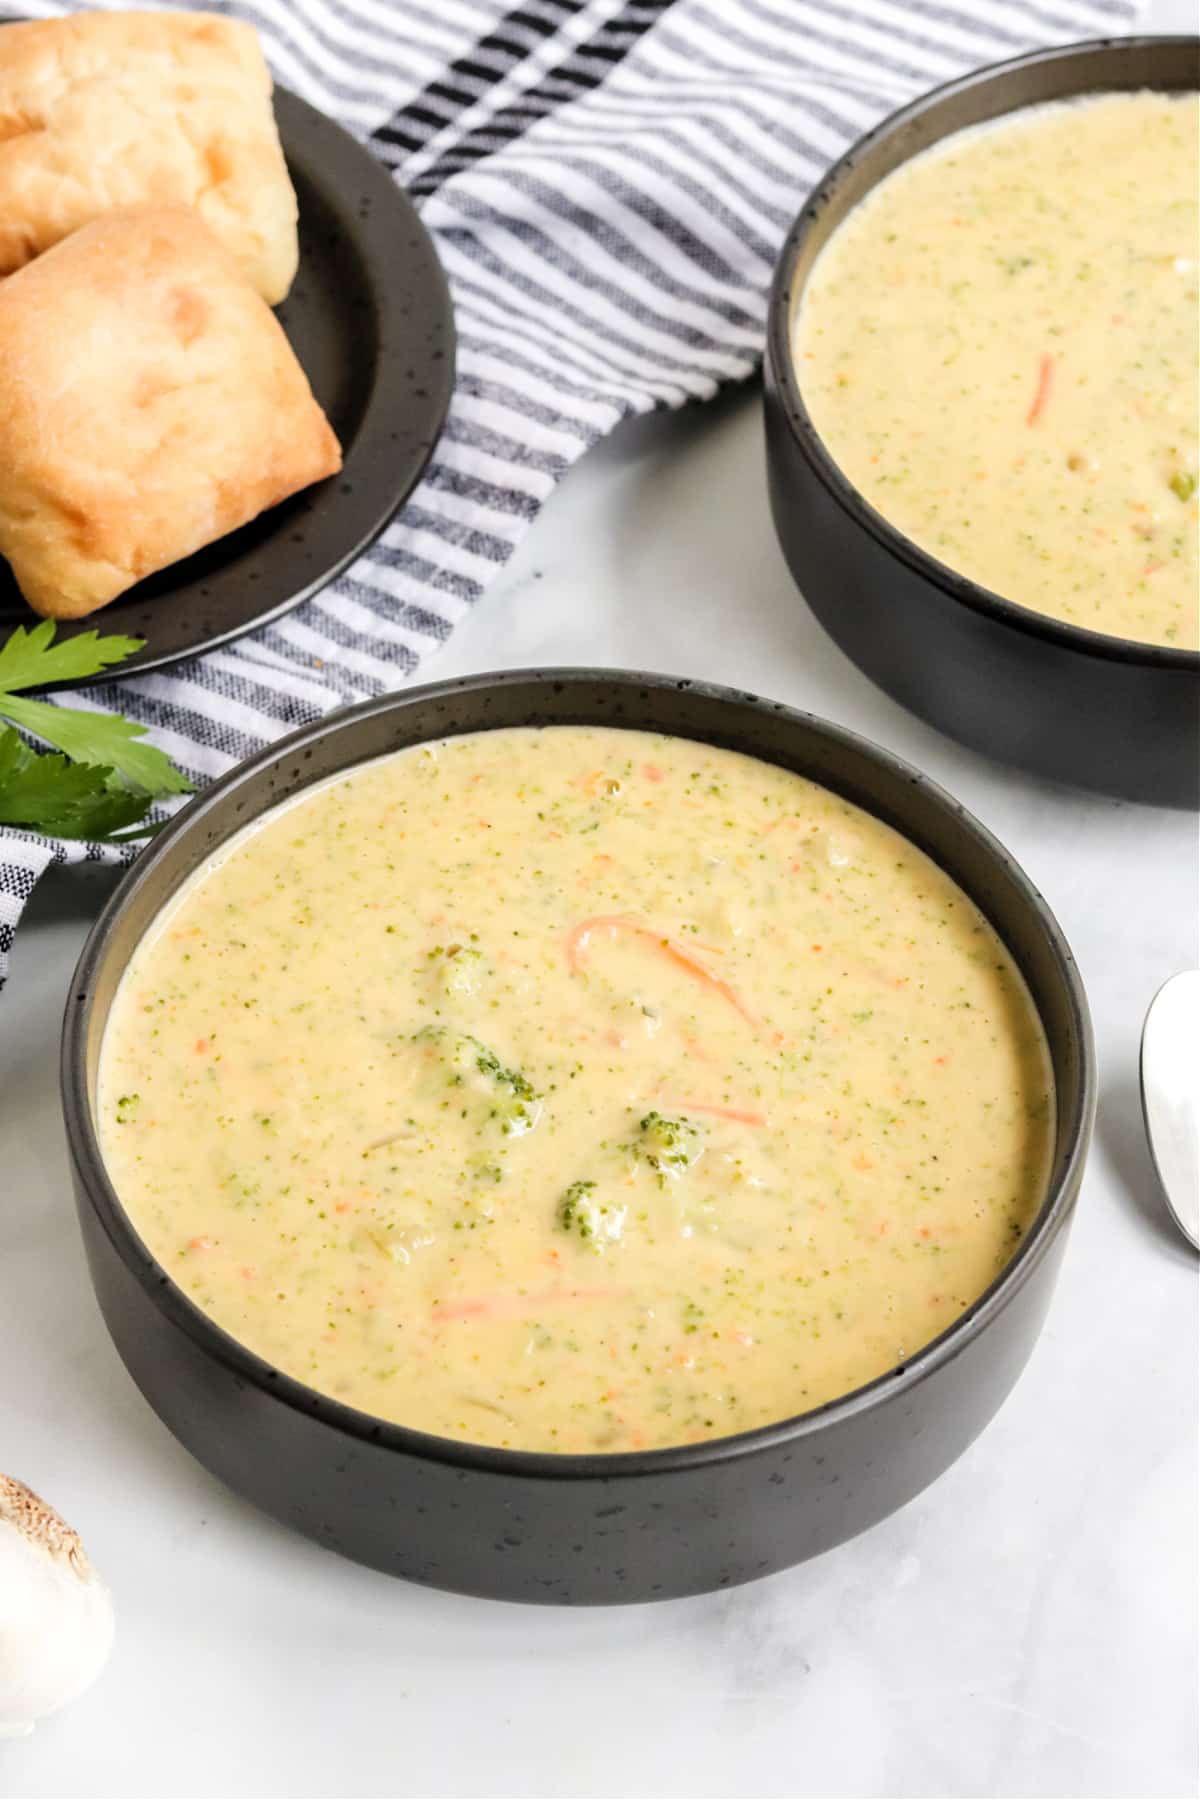 Broccoli cheese soup in two matte black bowls. A black plate of golden toasted rolls sit next to the soup on a grey and white striped cloth napkin.